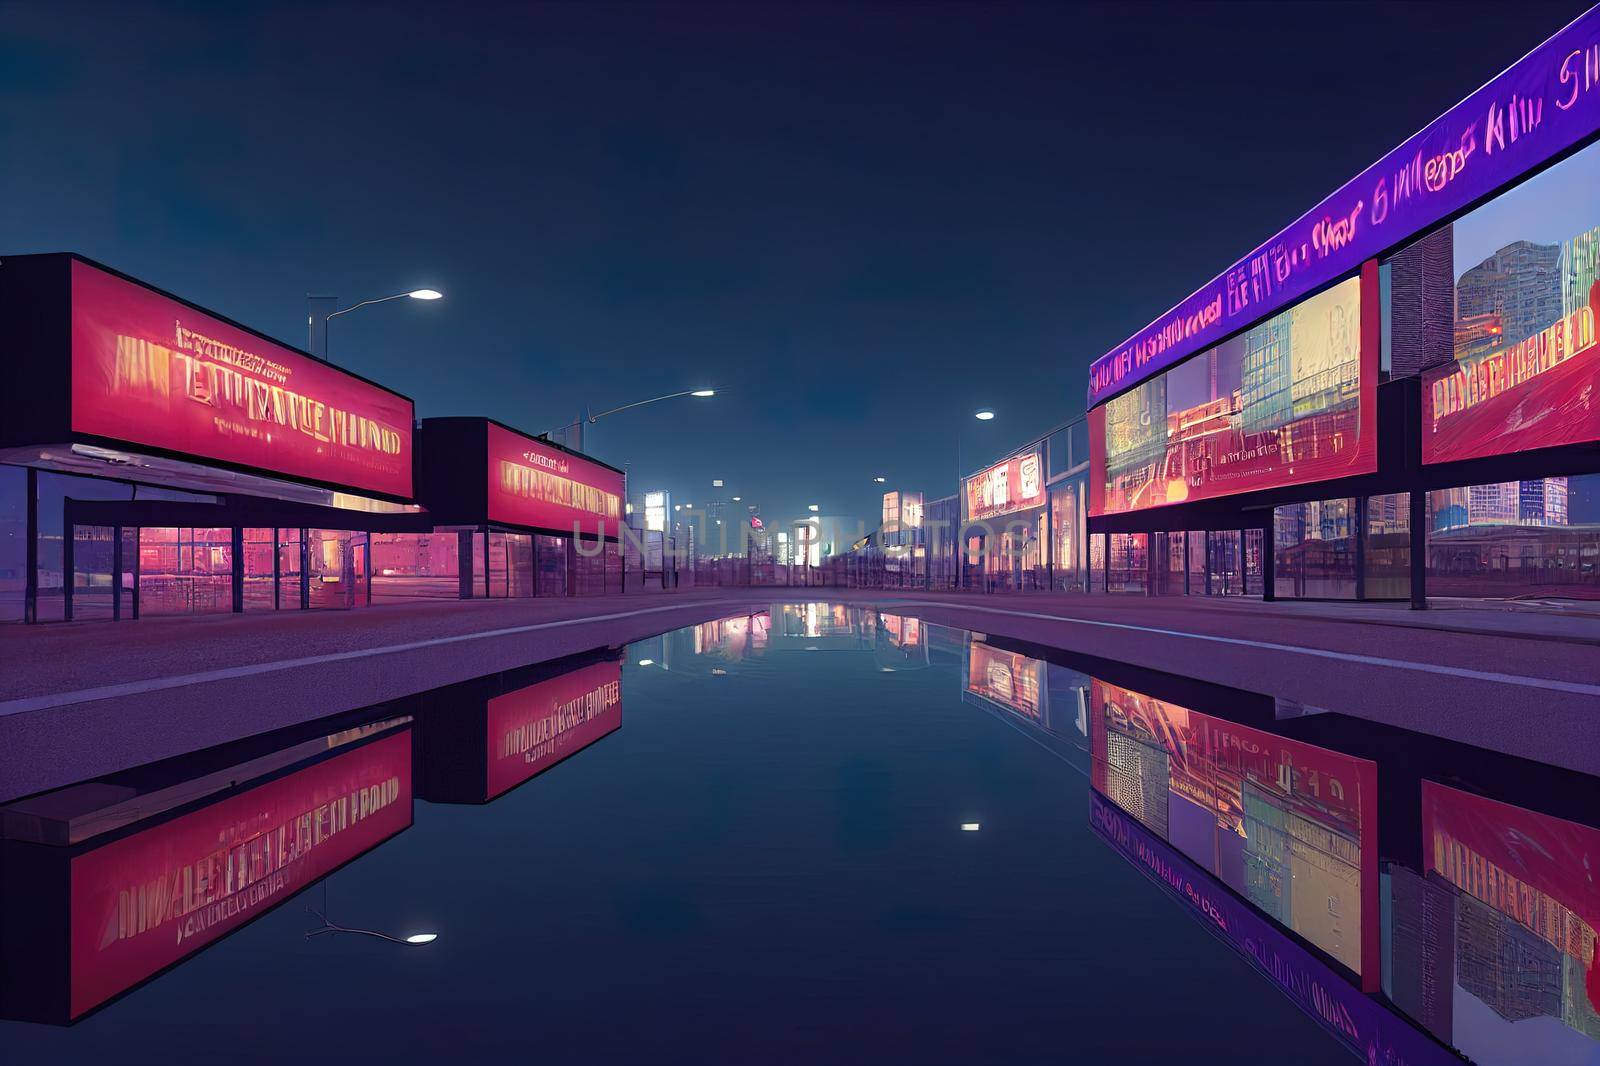 3D Rendering of billboards and advertisement signs at modern buildings in capital city with light reflection from puddles on street. Concept for night life, never sleep business district center CBD. High quality illustration